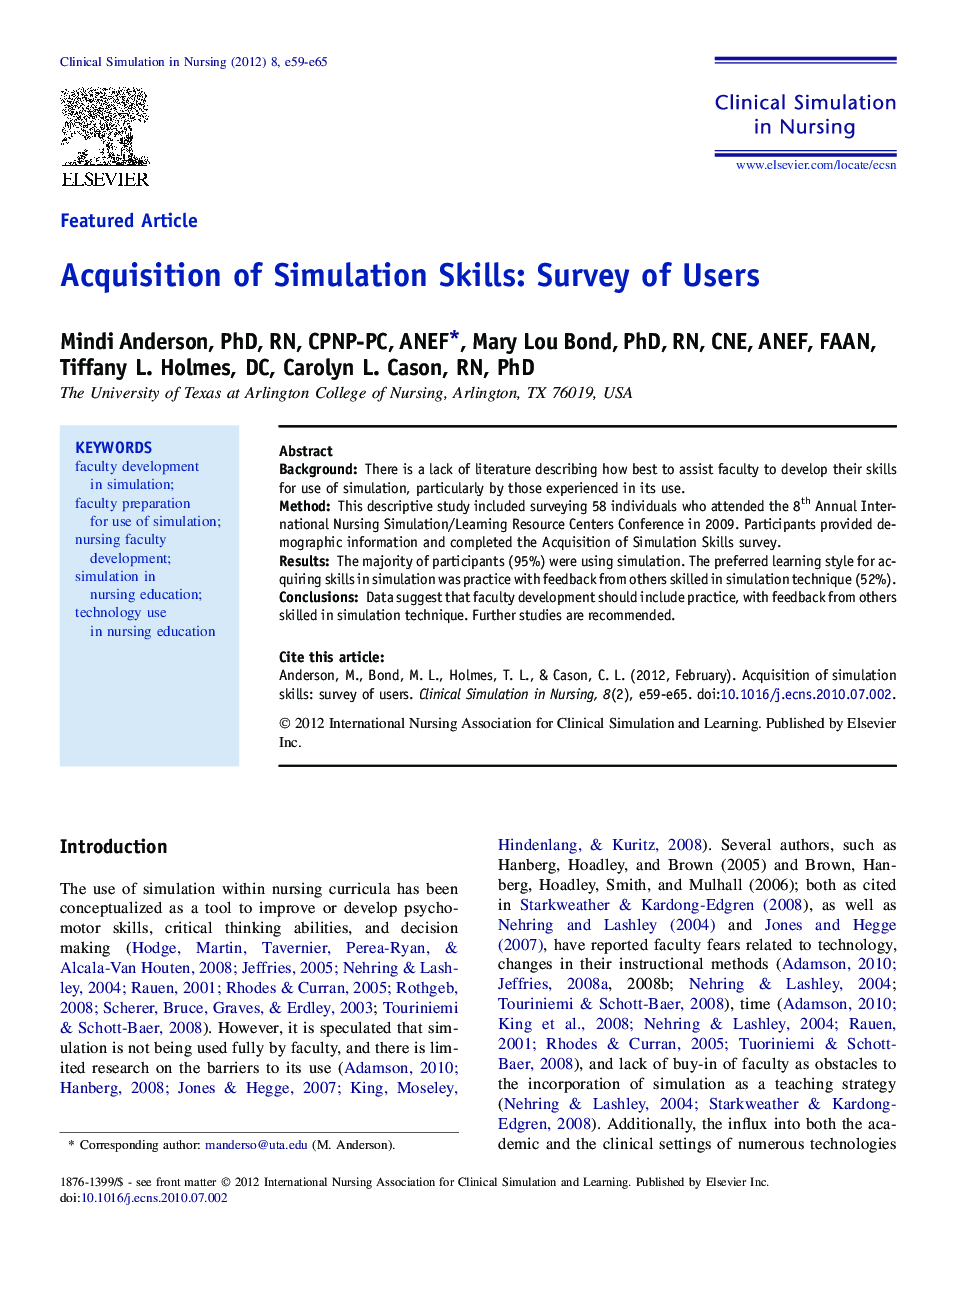 Acquisition of Simulation Skills: Survey of Users